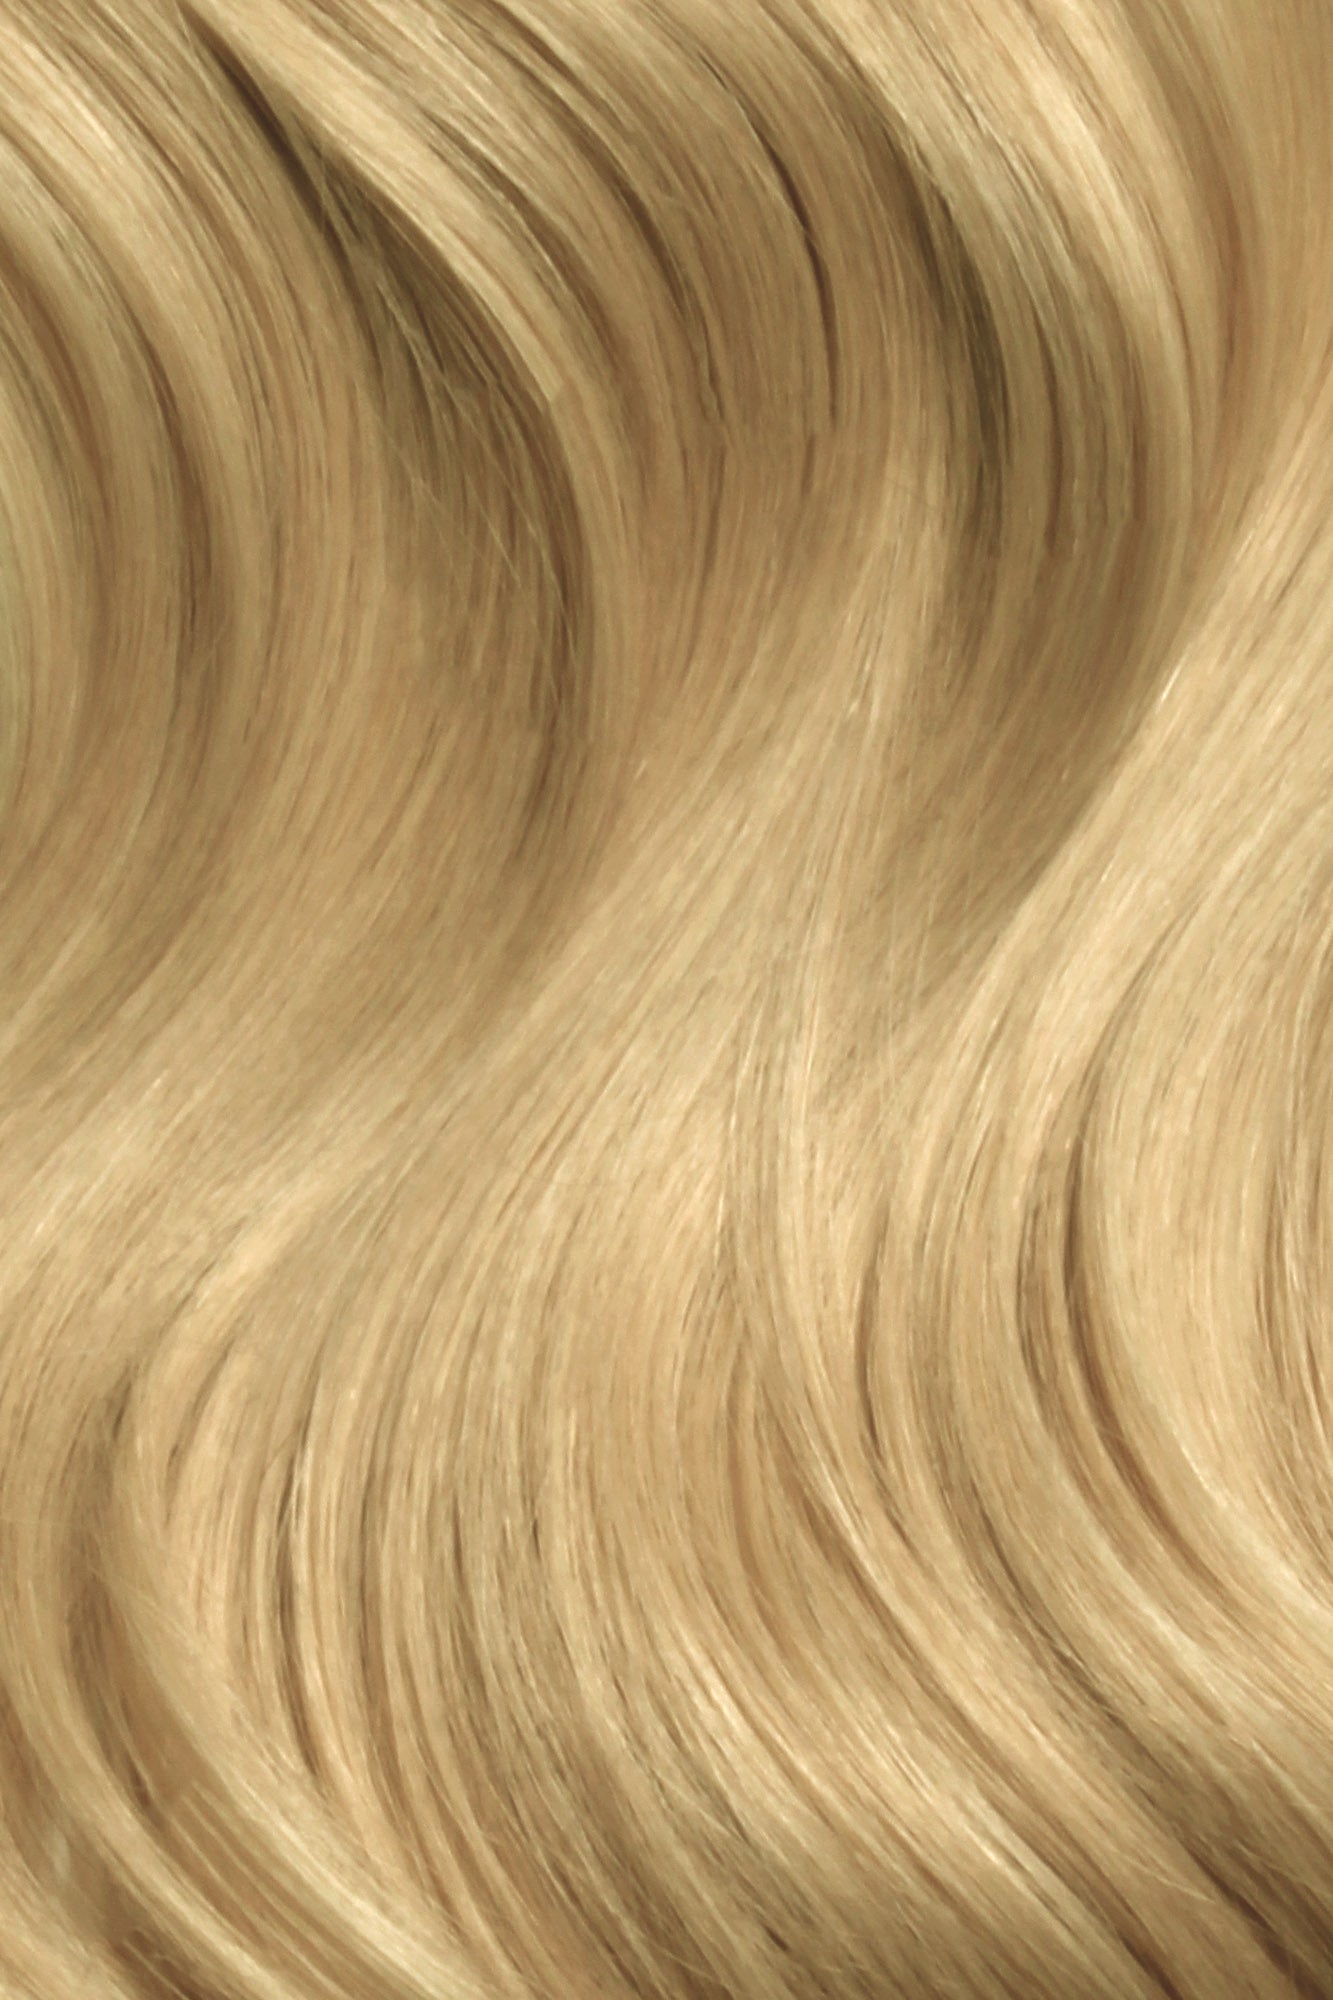 Nano Bonds 24 Inches - SWAY Hair Extensions Hollywood-Blonde-18-613 Ultra-fine, invisible bonds for a flawless, natural look. 100% Remy Human hair, lightweight and versatile. Reusable and perfect for individual or salon use.